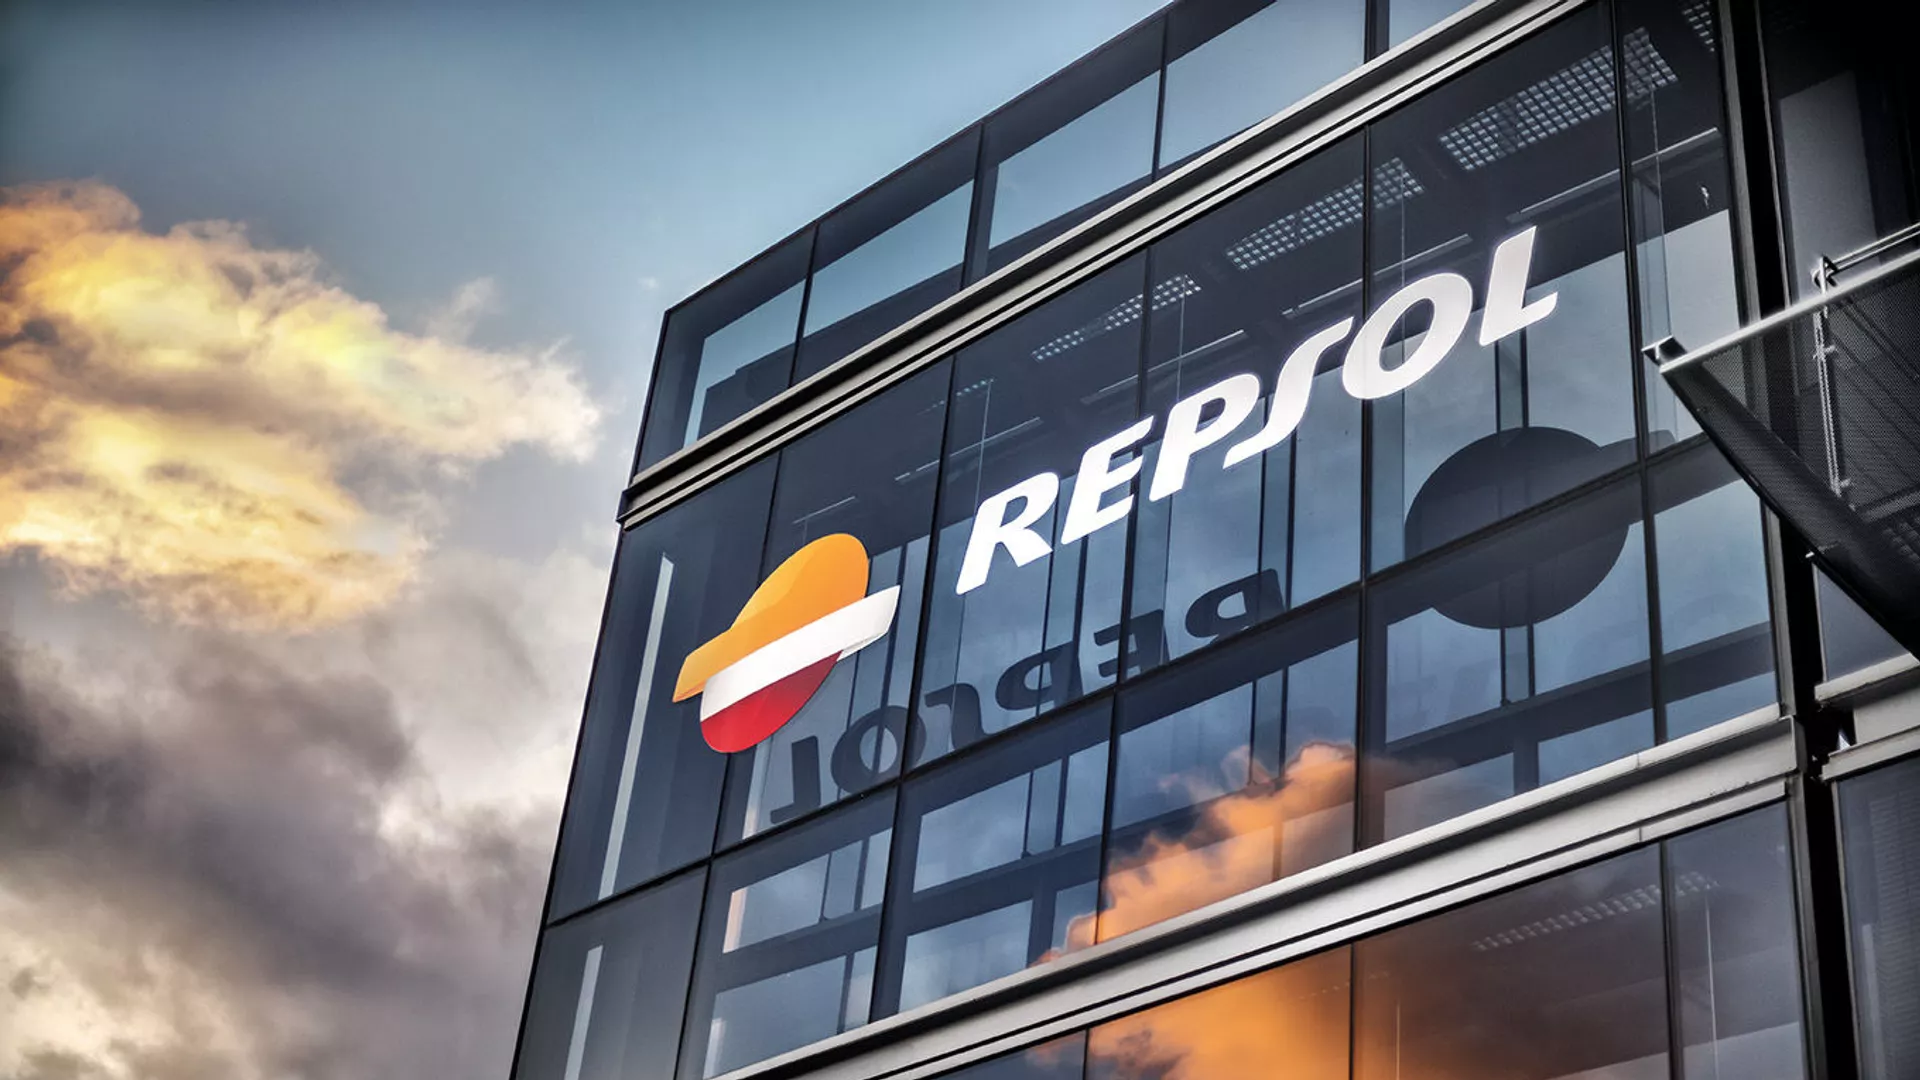 Featured Image: Repsol building with logo. File photo.